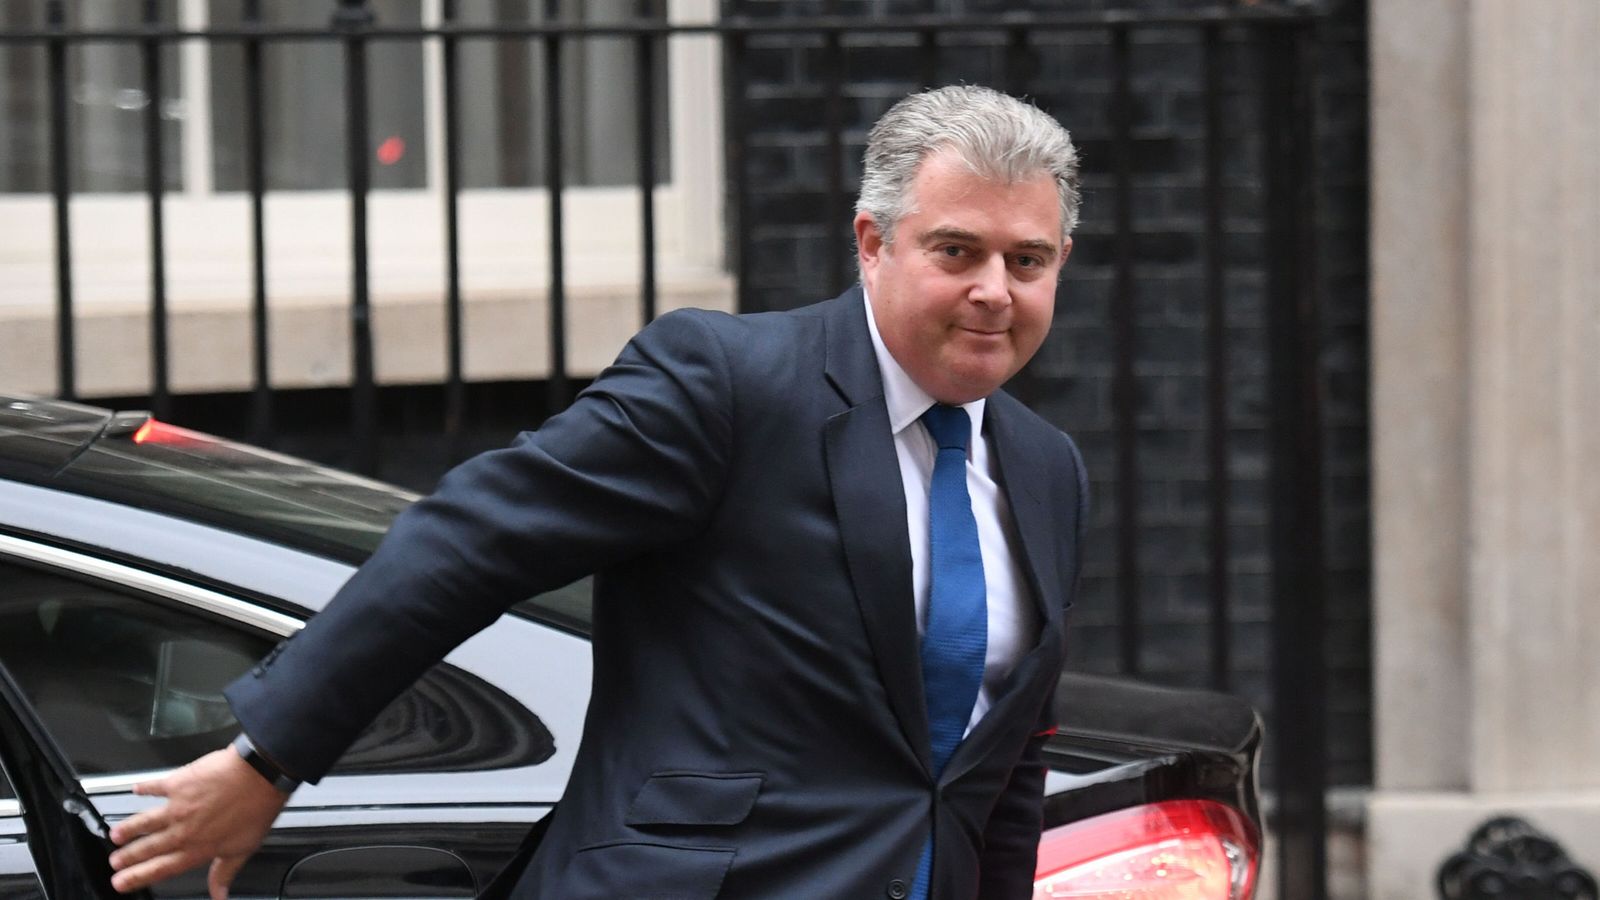 Conservative Party chairman Brandon Lewis in Brexit votes 'pairing' row ...